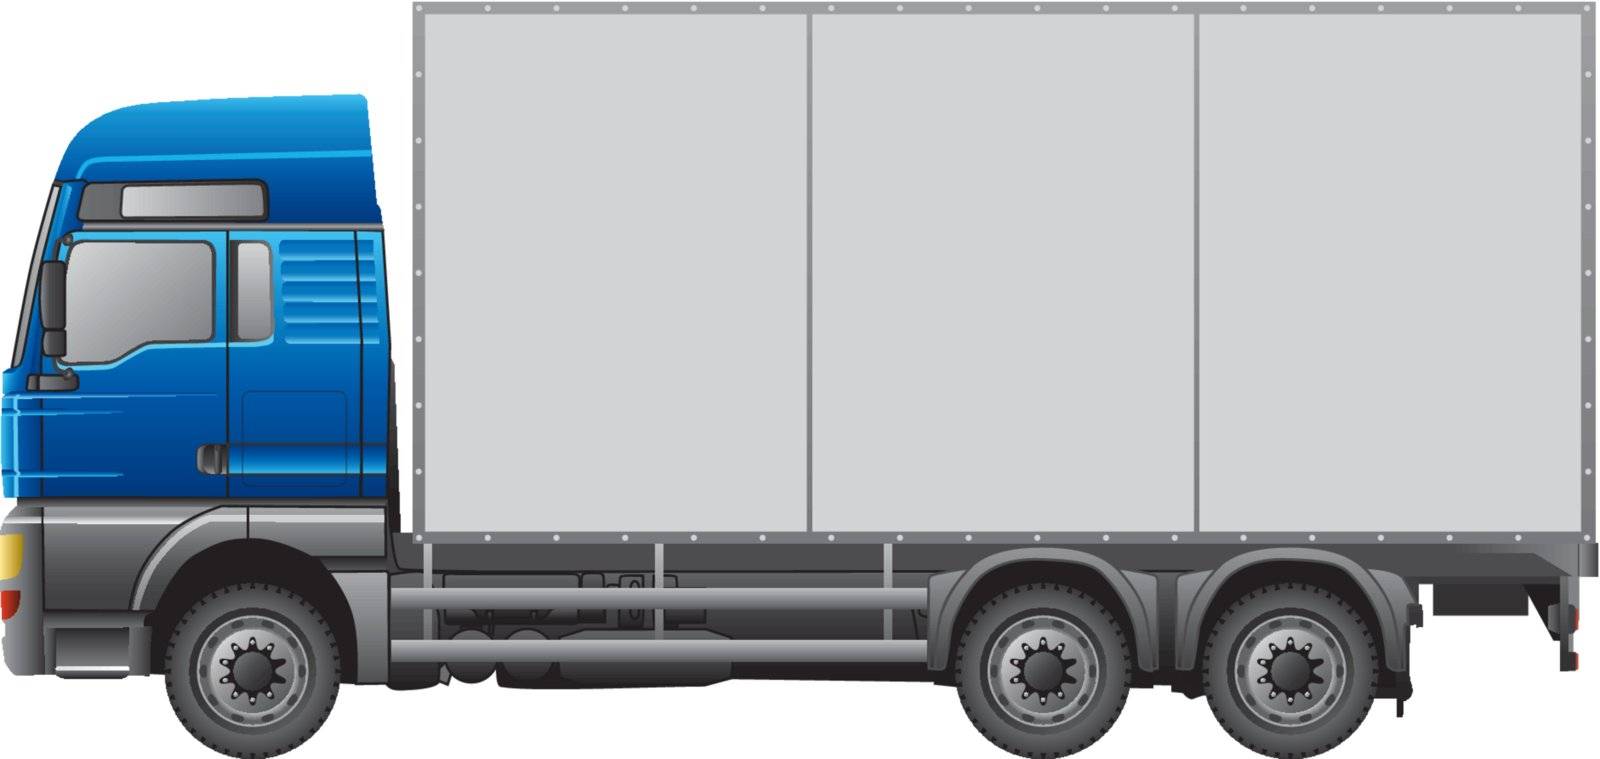 Semi-trailer truck isolated on white